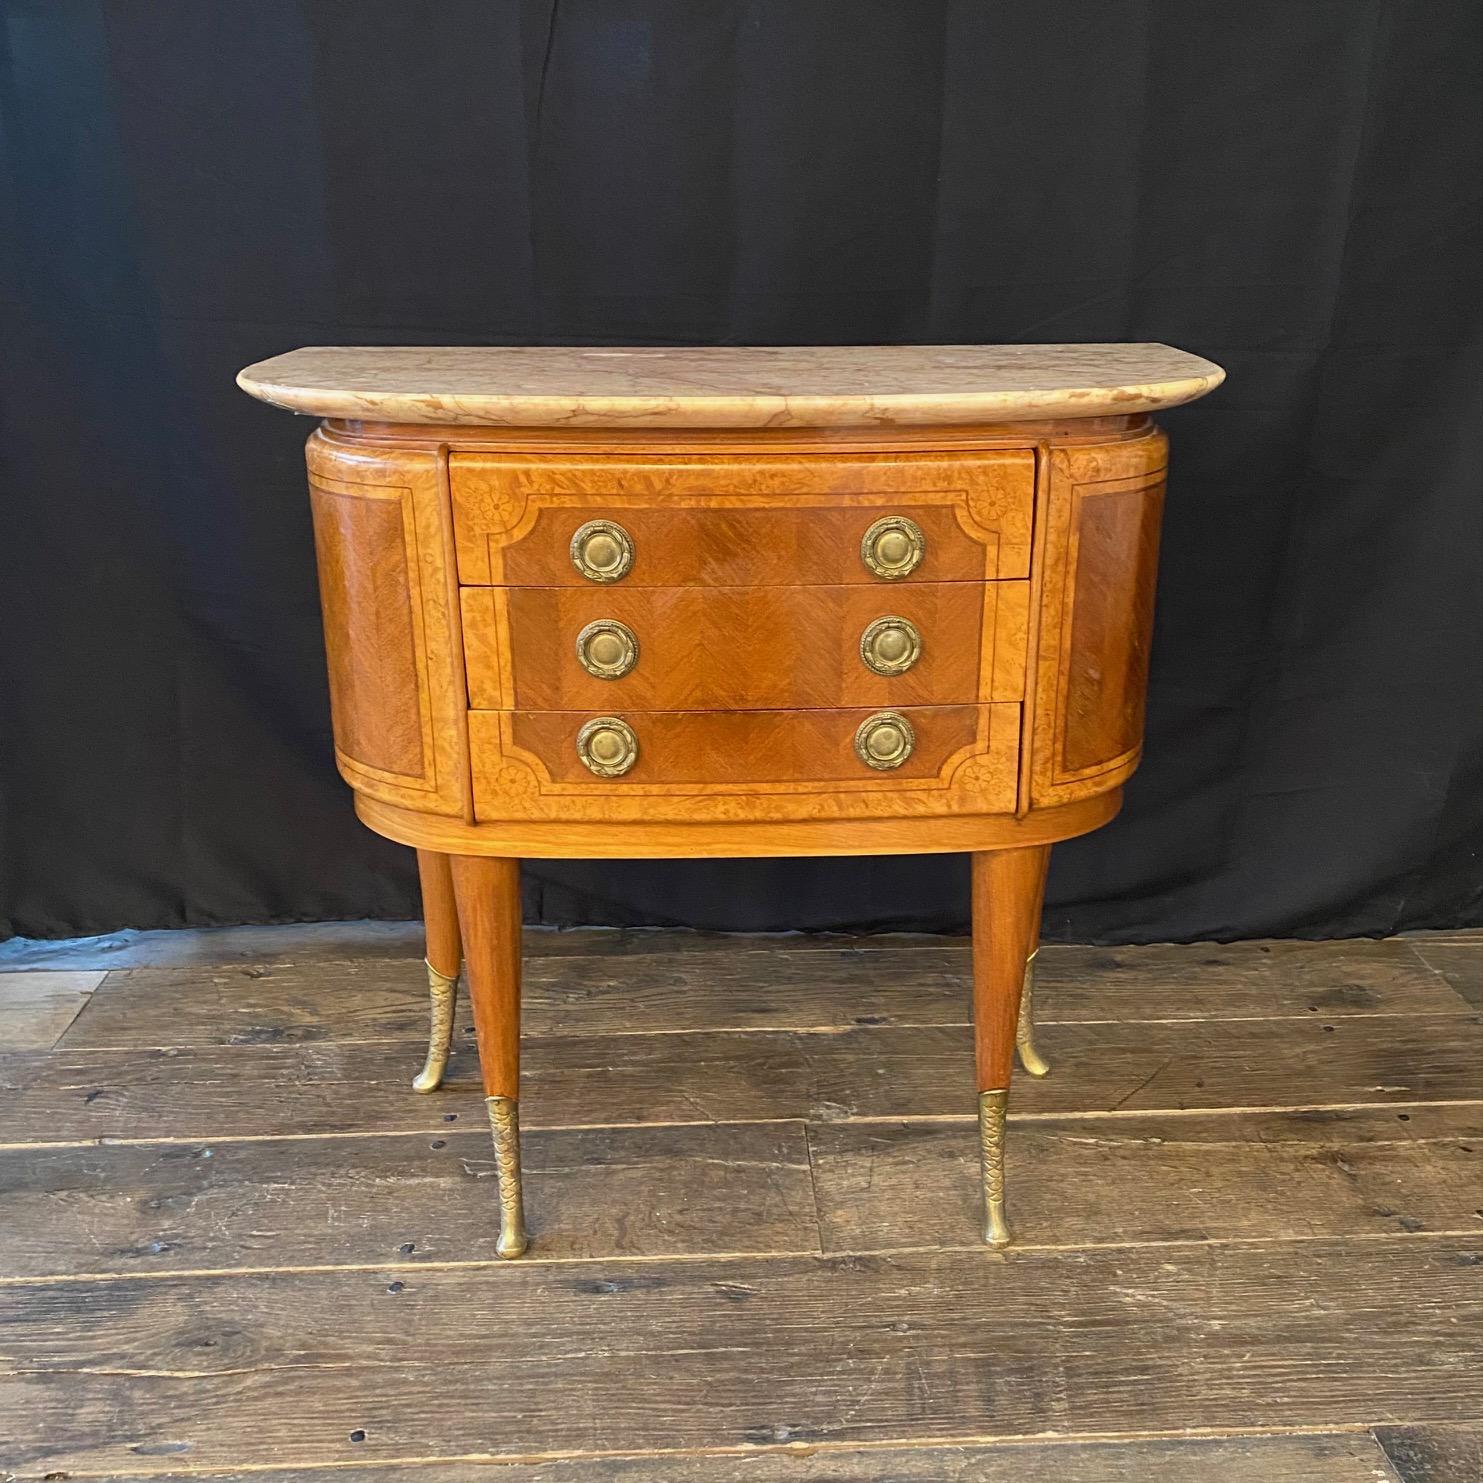 Pair of elegant French demilune commodes with marble tops and three spacious drawers in each. Beautifully inlaid with walnut and fruitwood in neoclassical design. Original marble tops. Supported on stunning scaled tapering brass legs. Drawer pulls